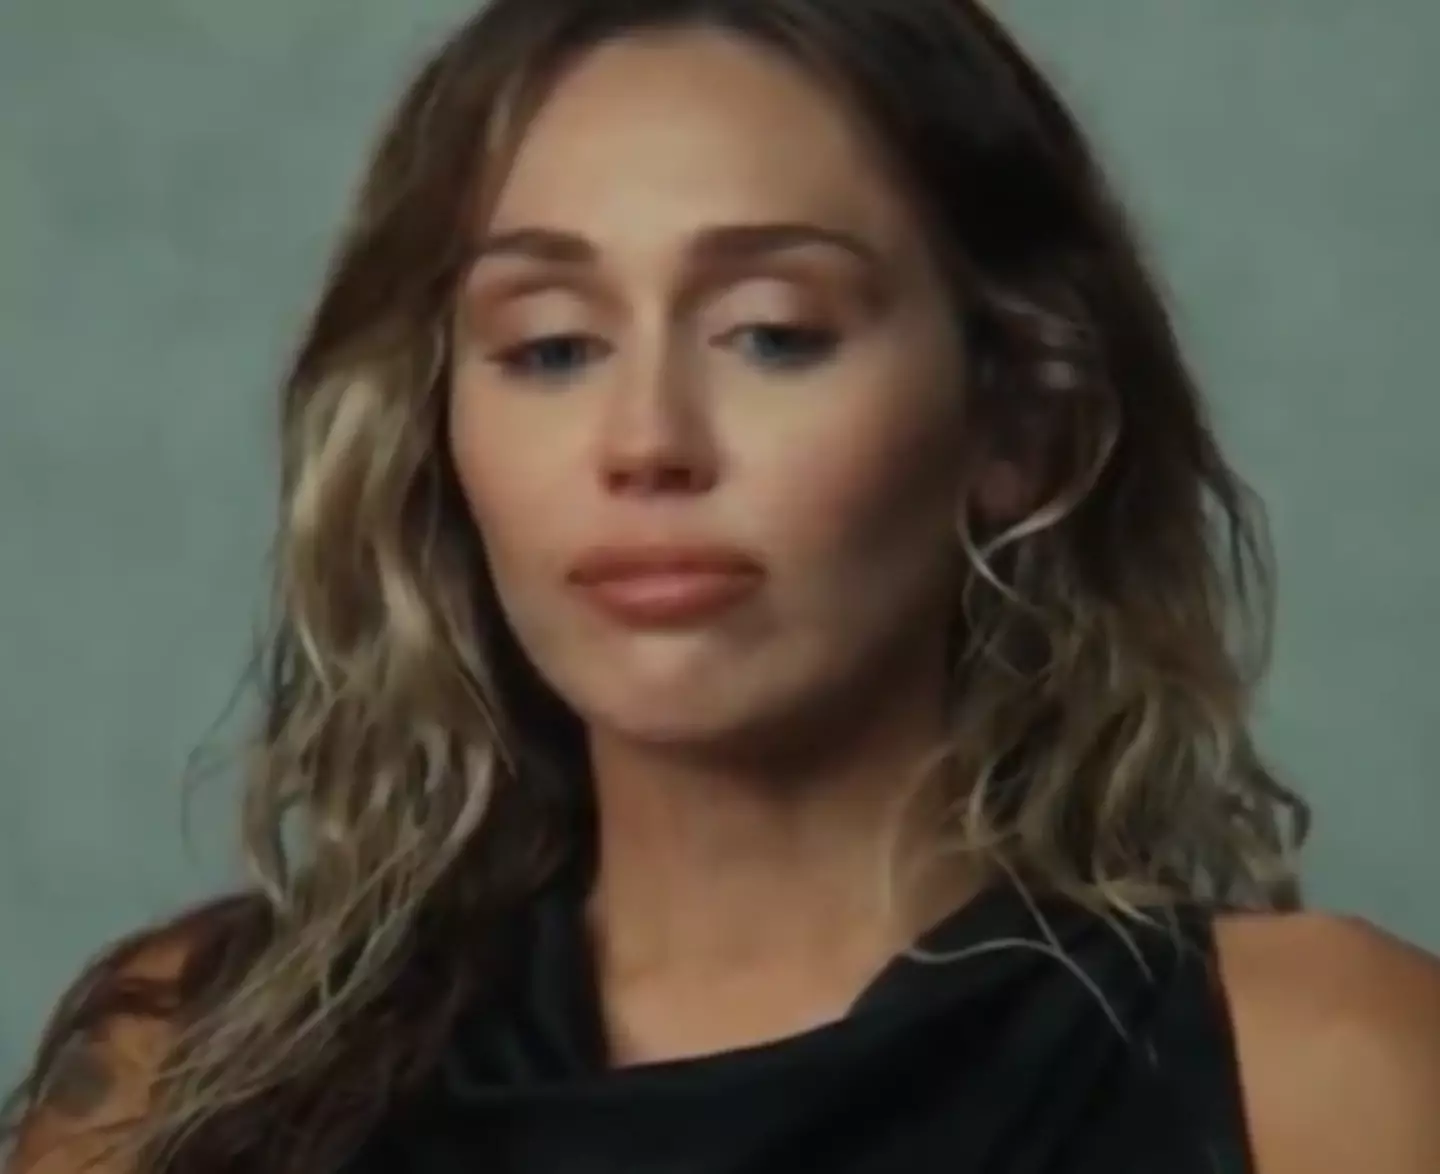 Miley Cyrus was left emotional after talking about her father.